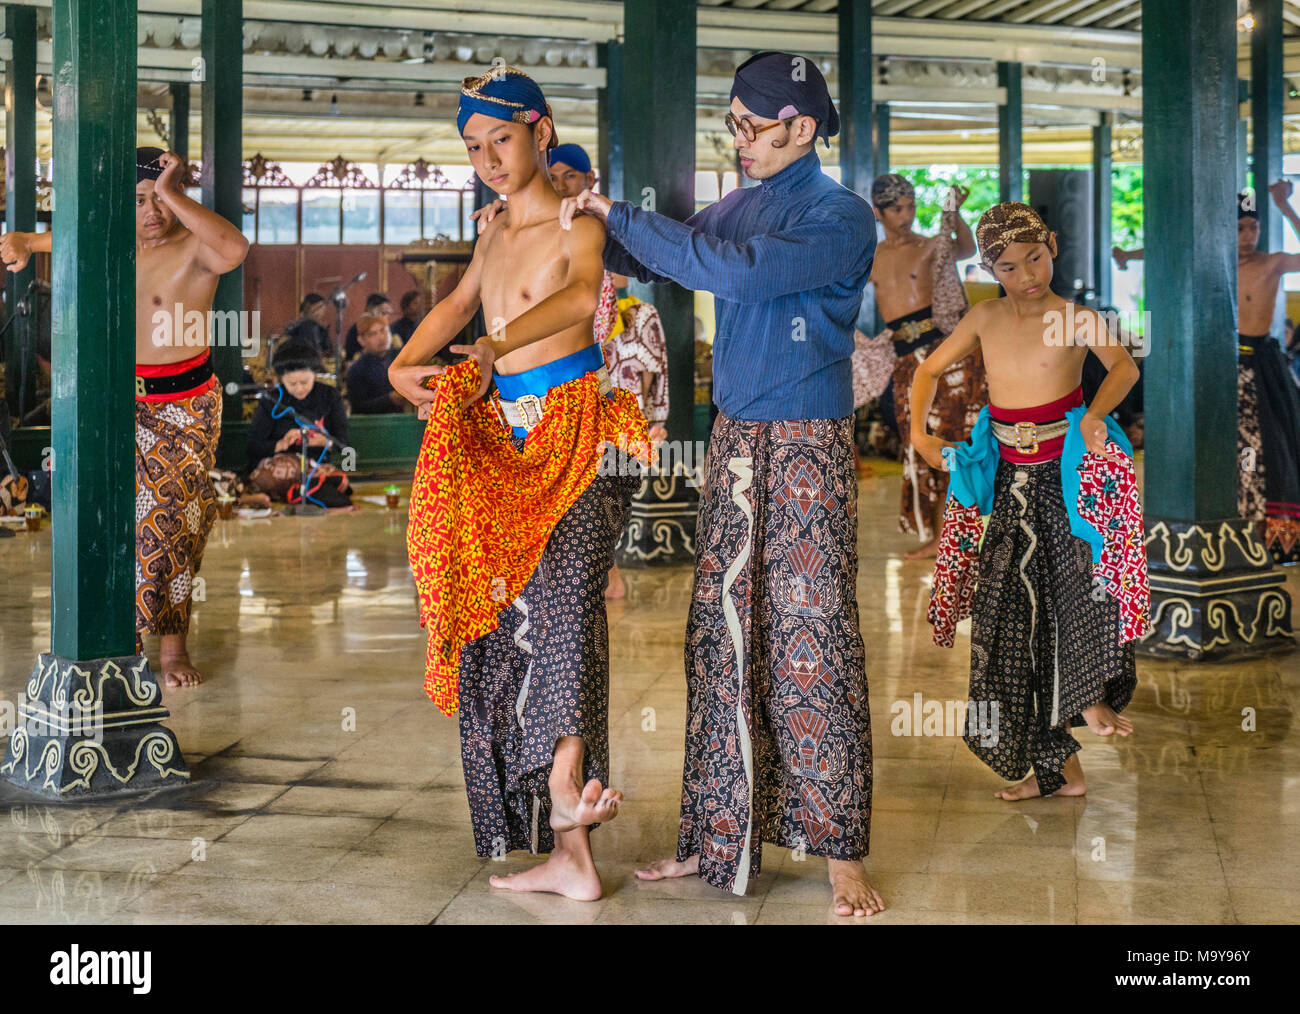 dance instructor correcting the posture of a young dancer during Beksan Putra, traditional male palace dance performance at the Kraton Ngayogyakarta H Stock Photo